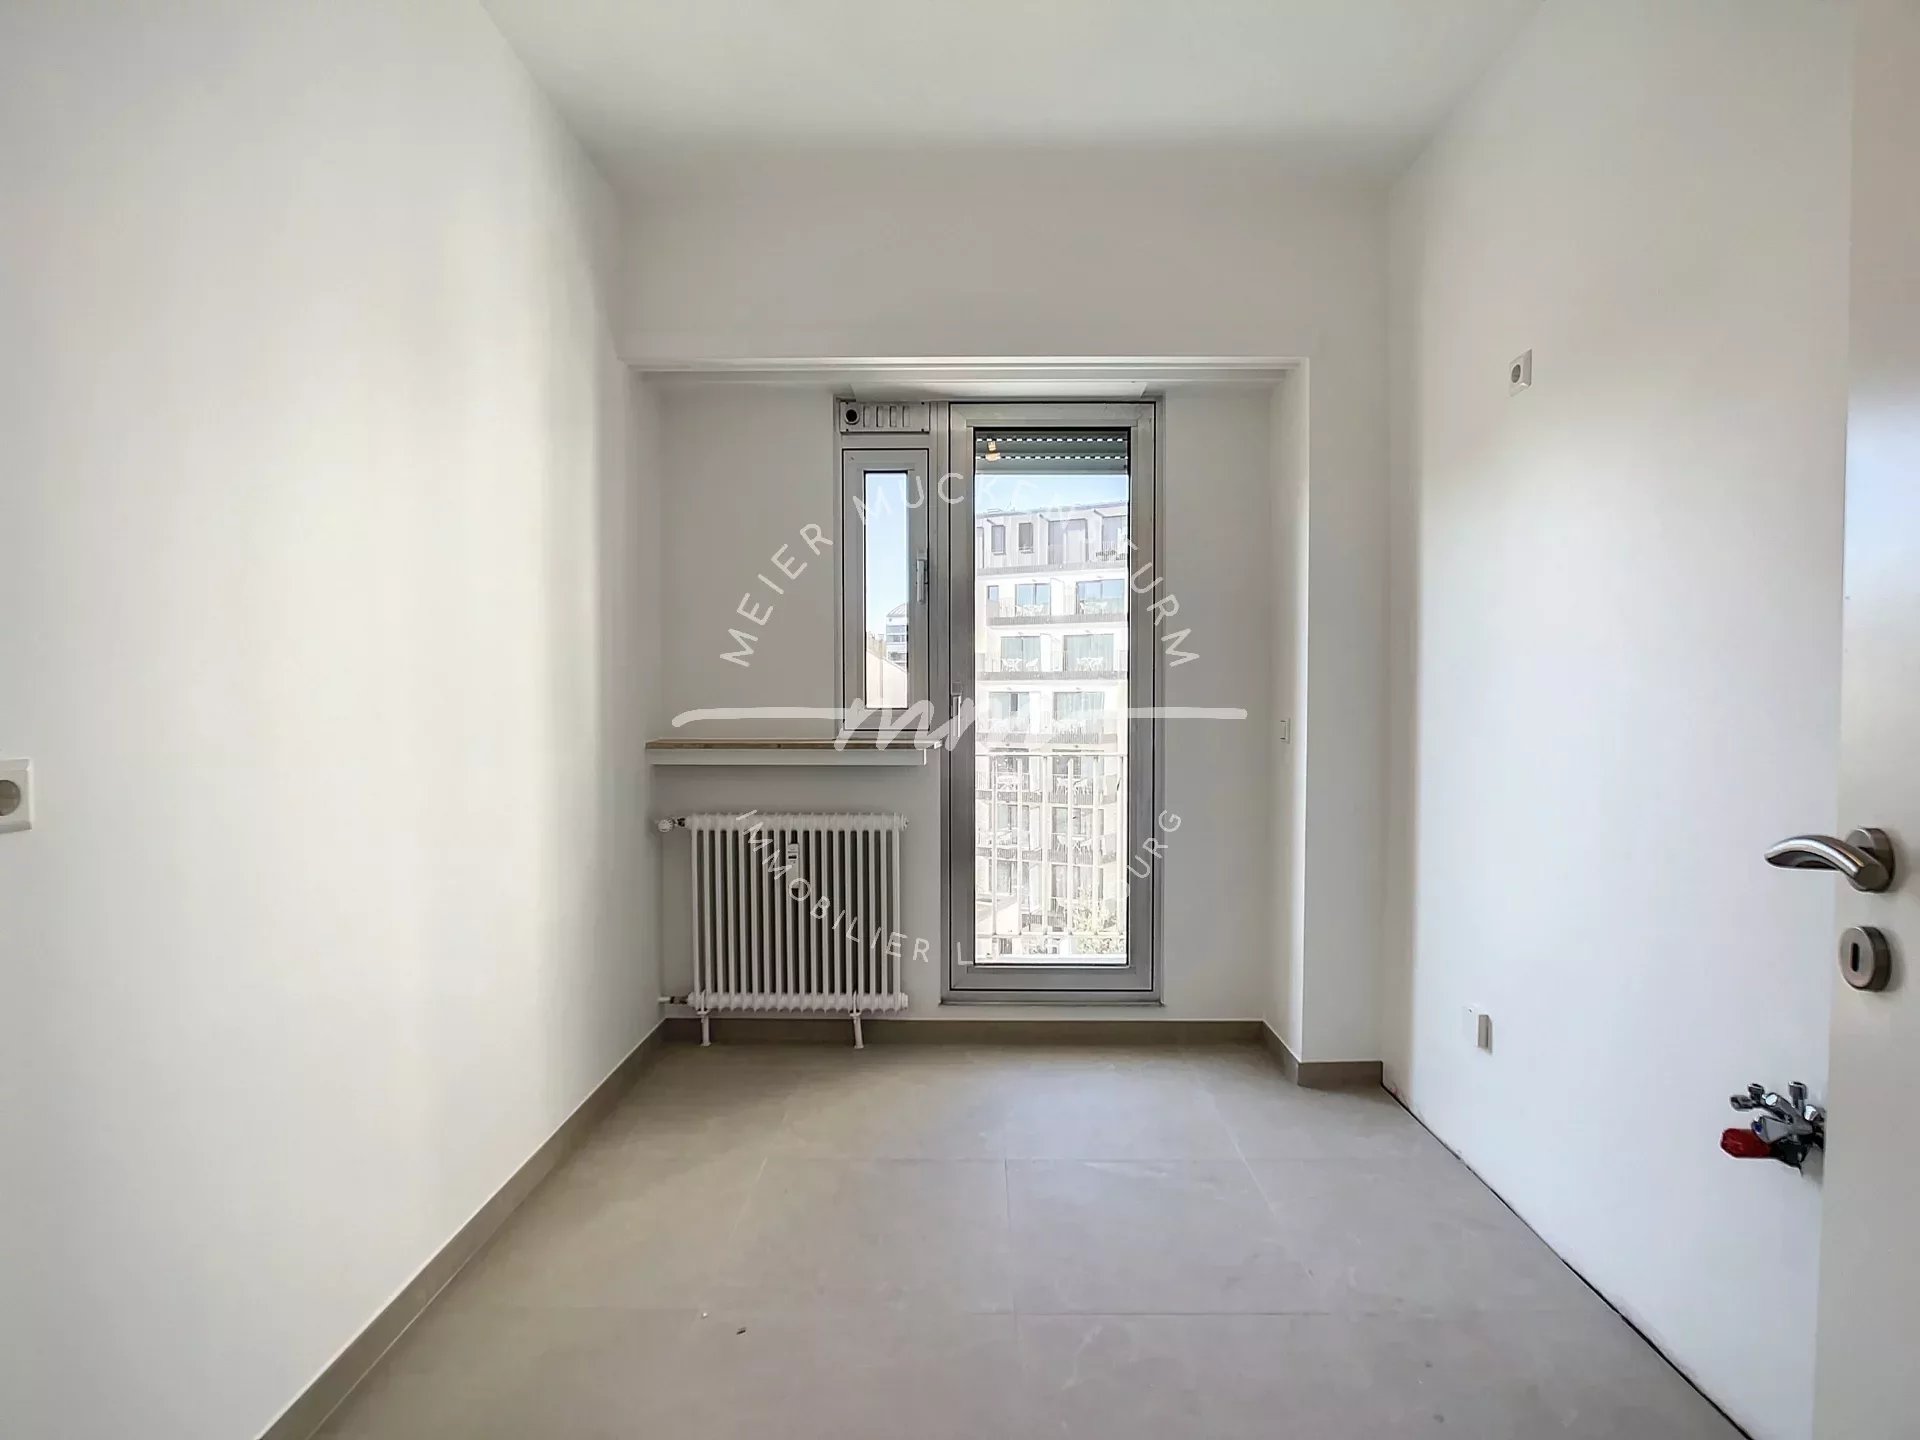 Sale Apartment - Luxembourg Gare - Luxembourg